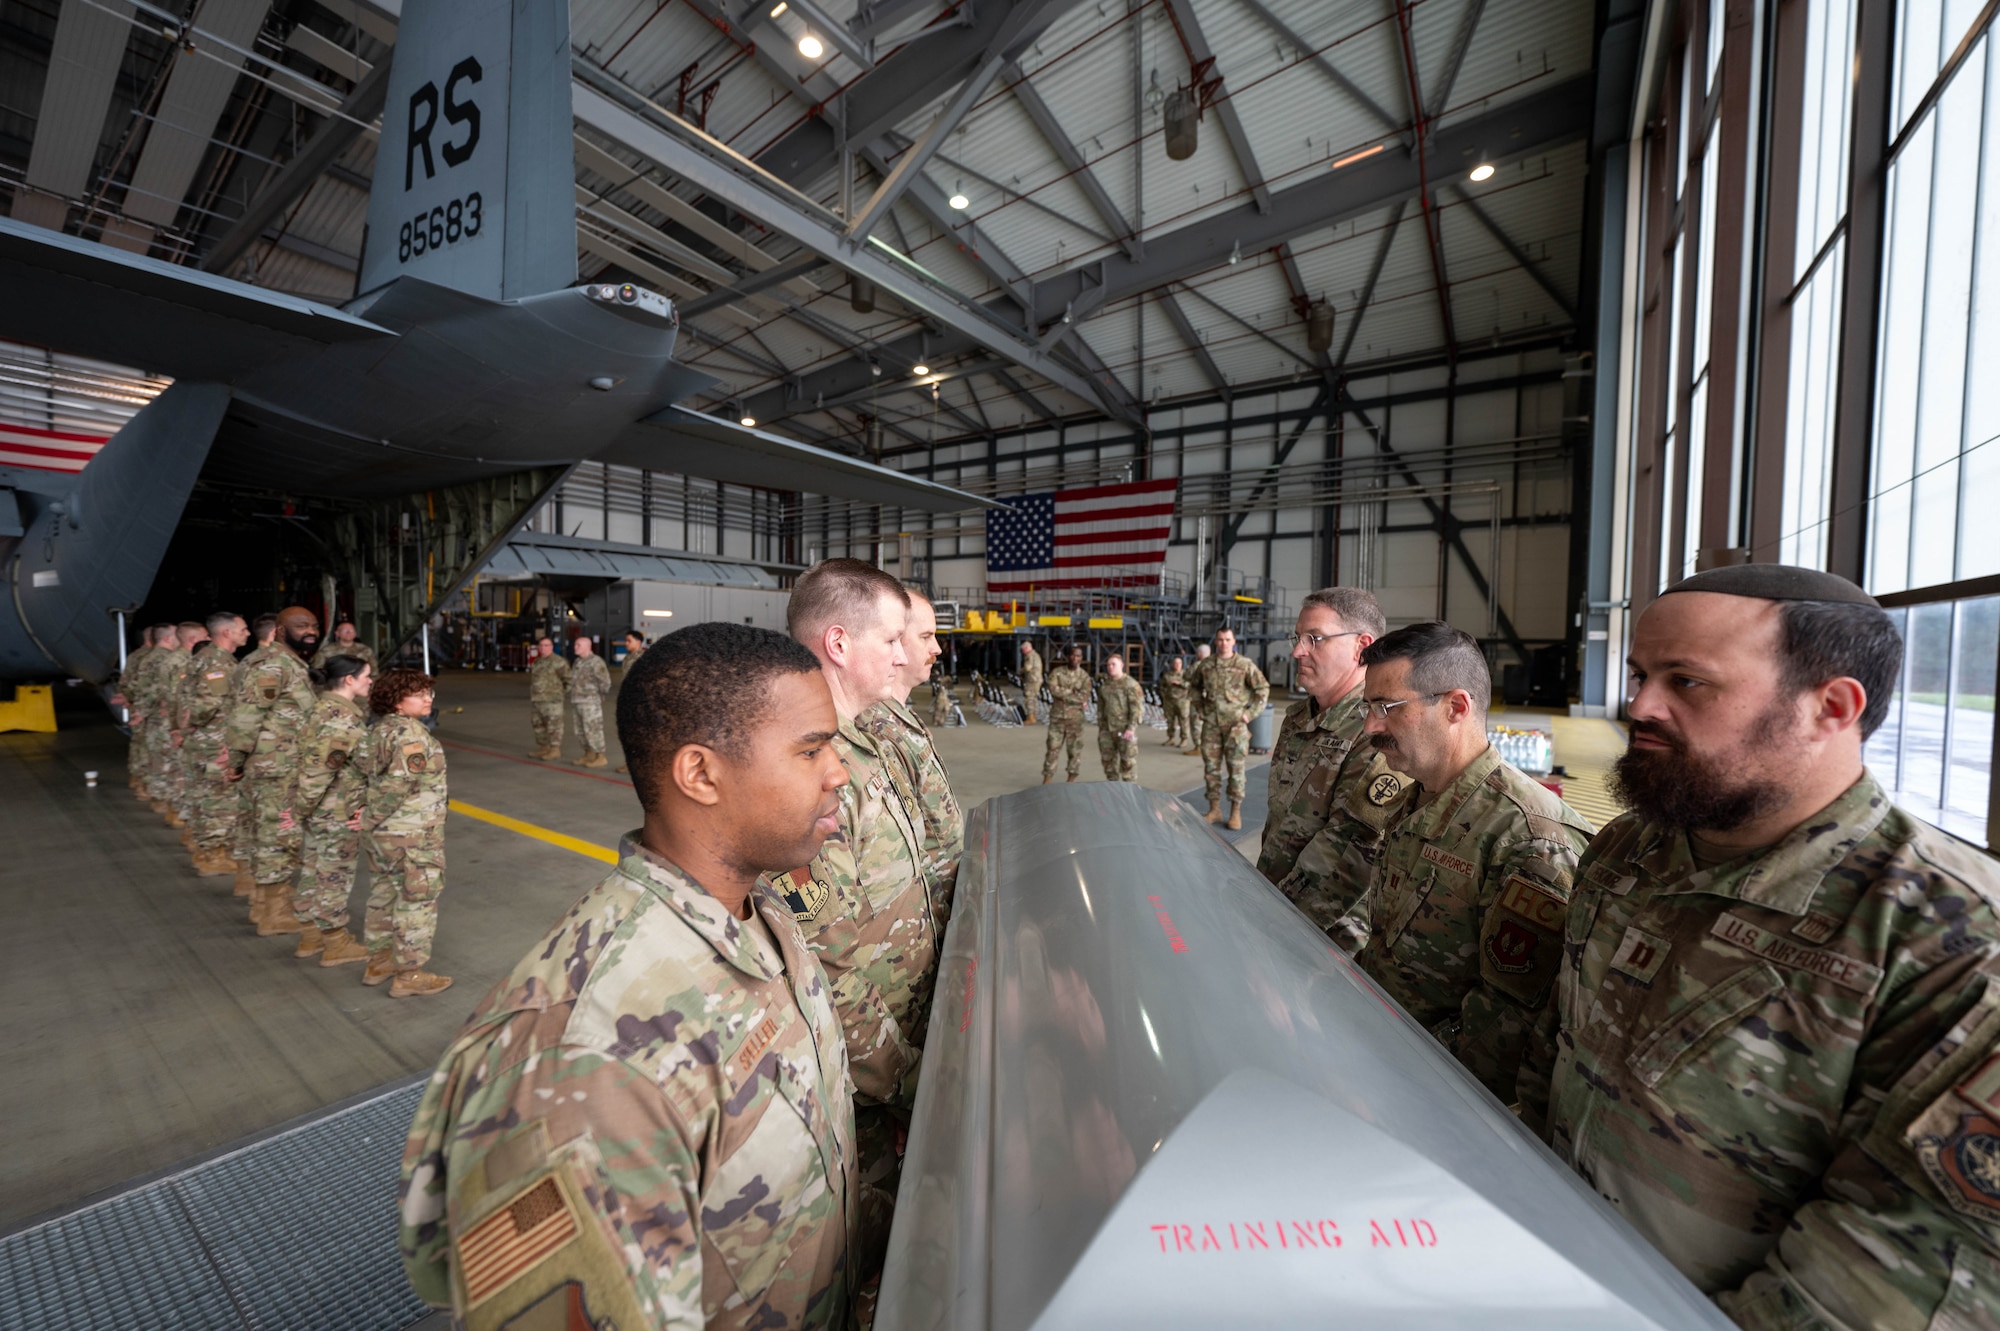 Religious support military members participate in a ramp ceremony training